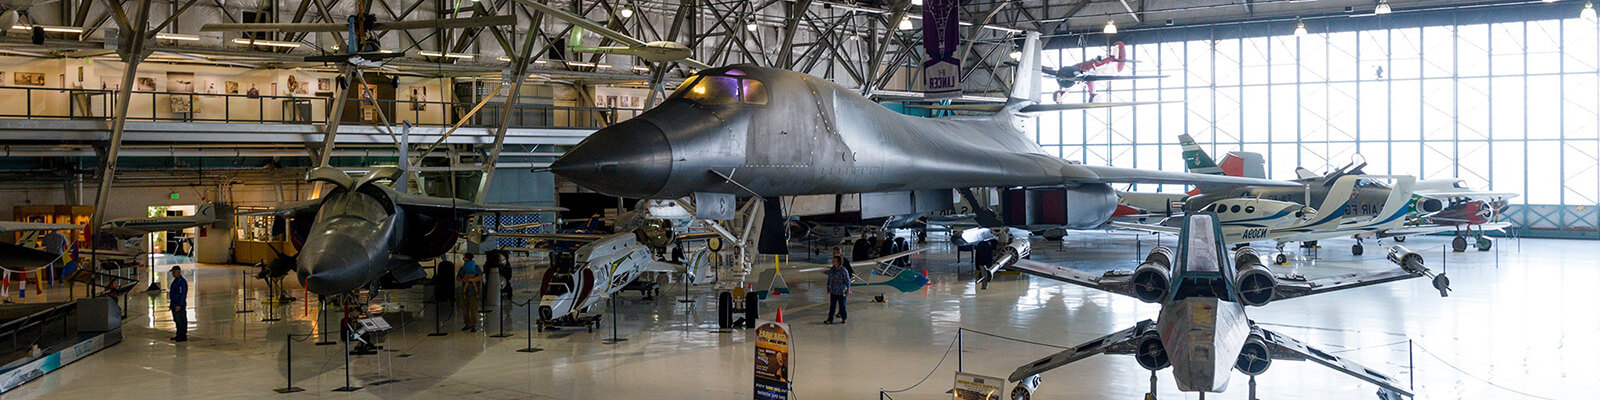 Wings Over the Rockies Air Space Museum Coupons